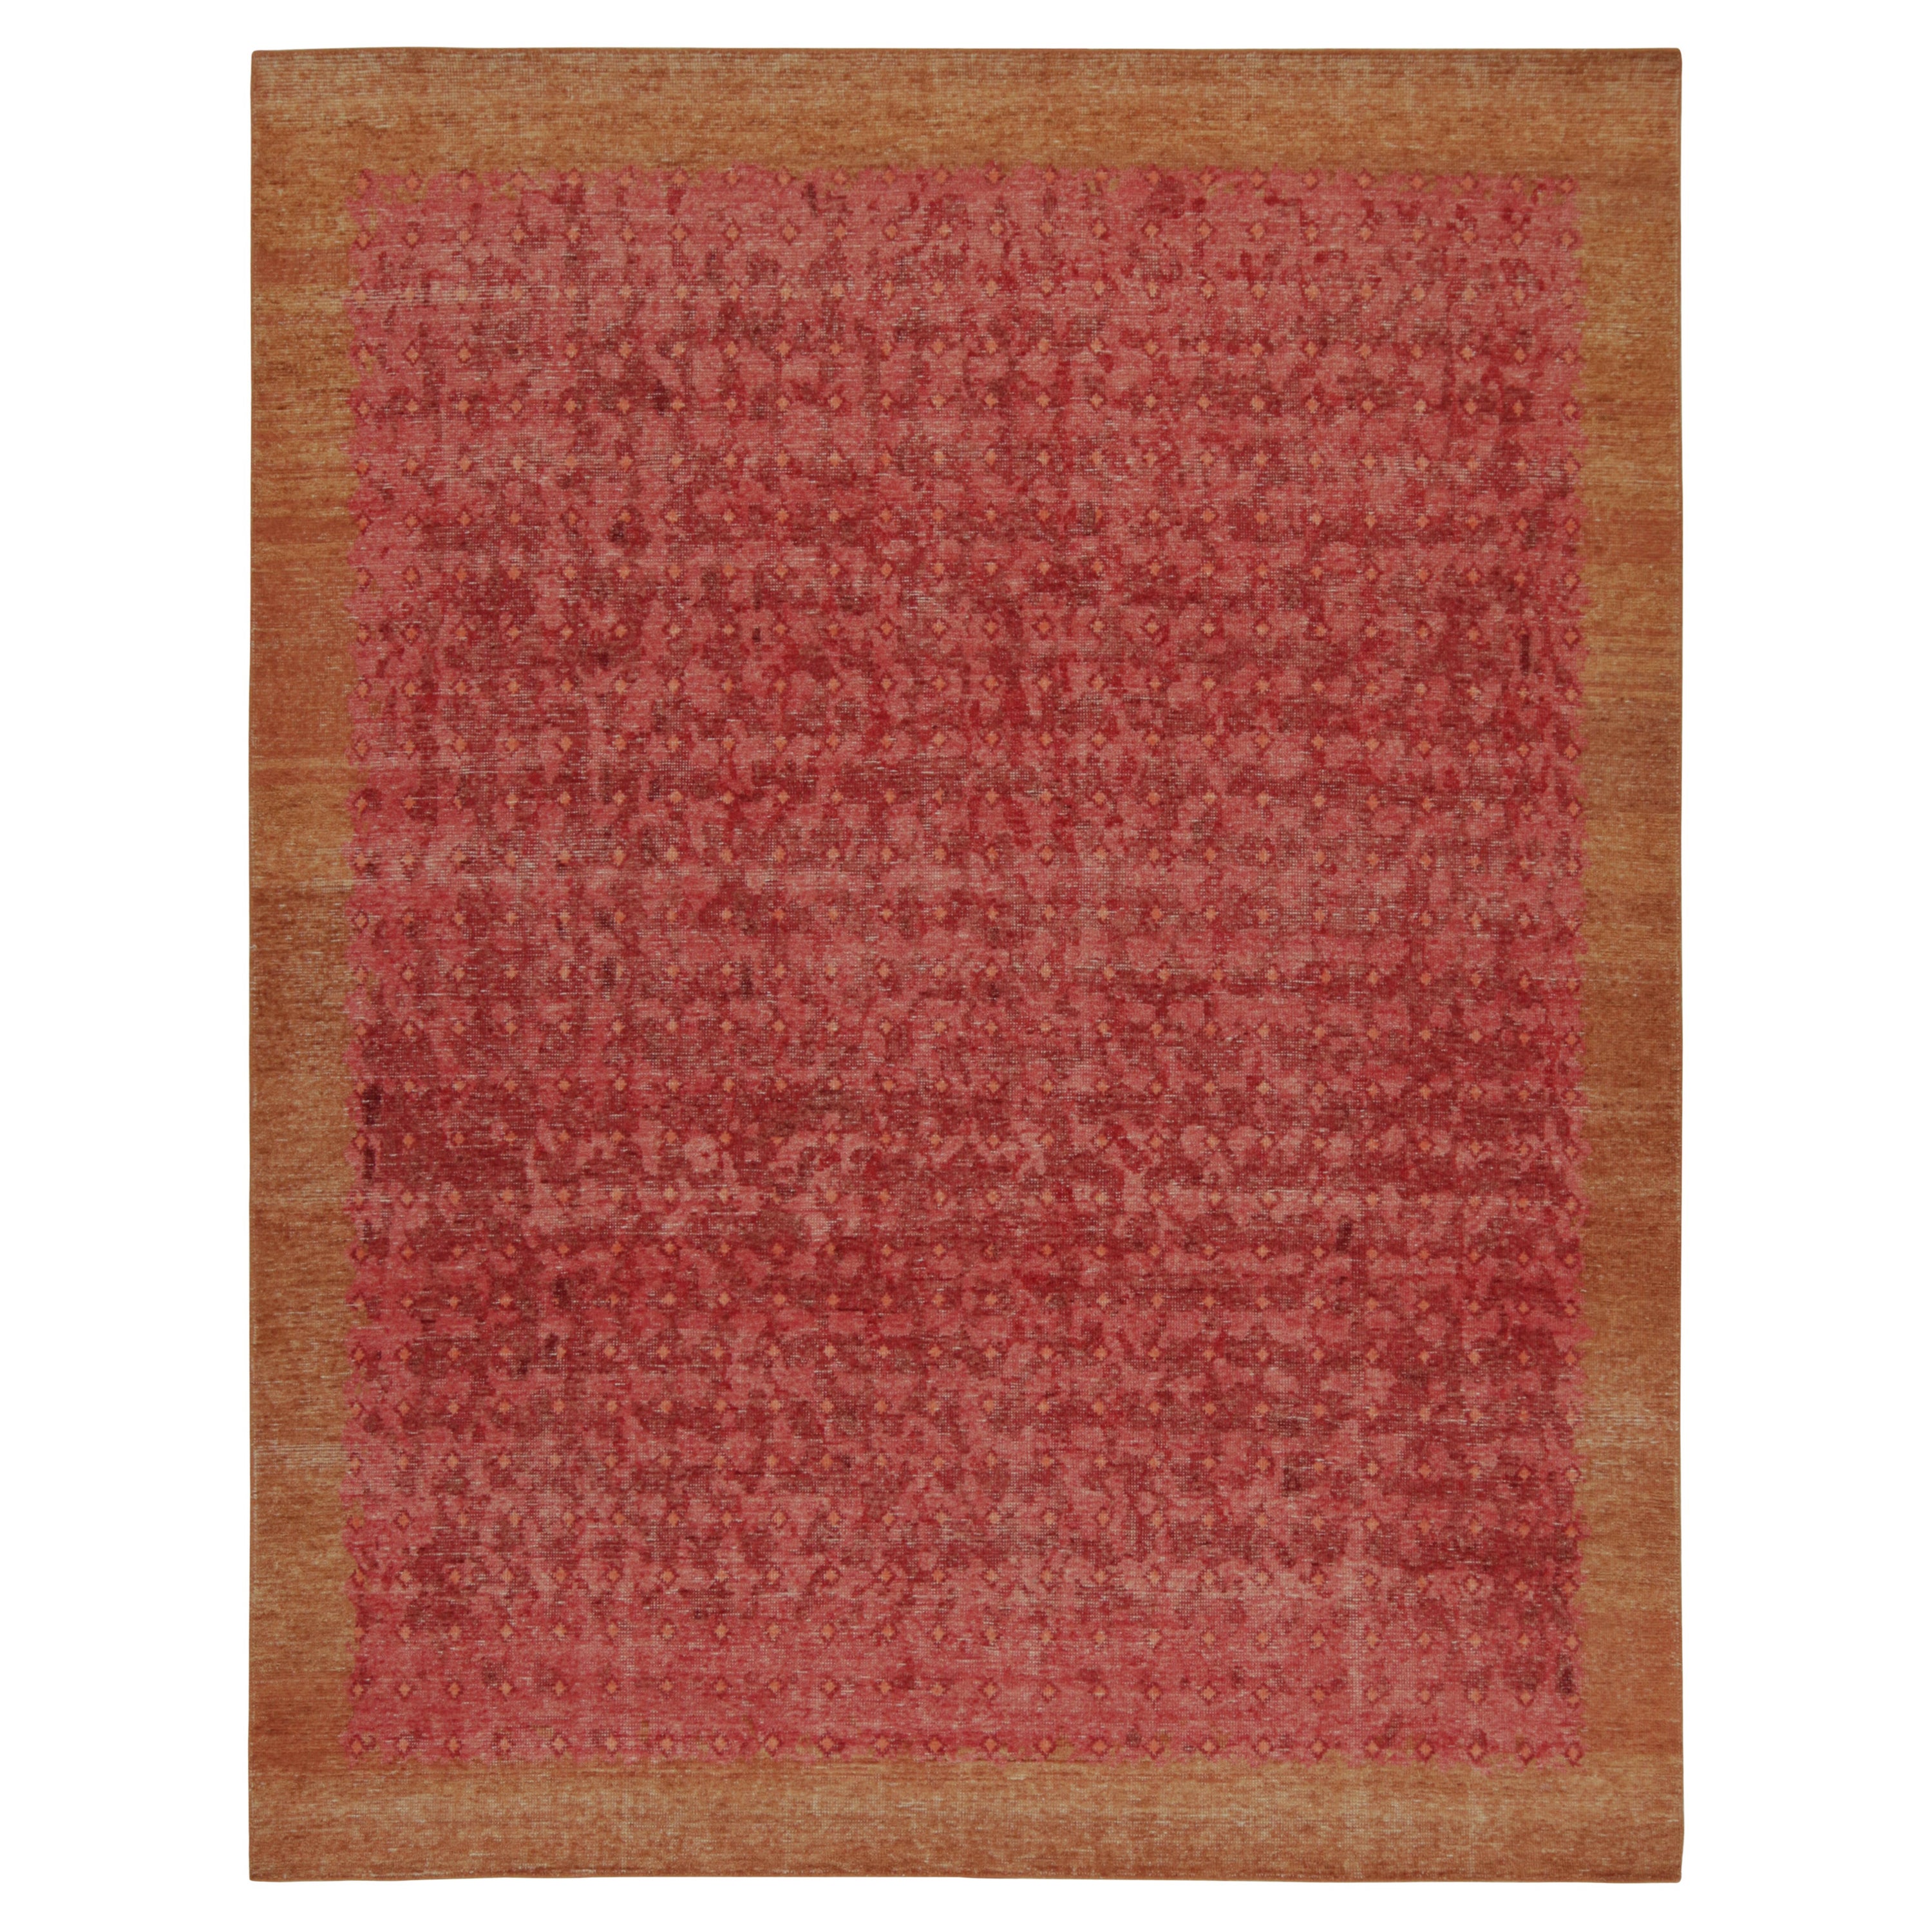 Rug & Kilim’s Distressed Style Transitional Rug in Red Geometric Patterns